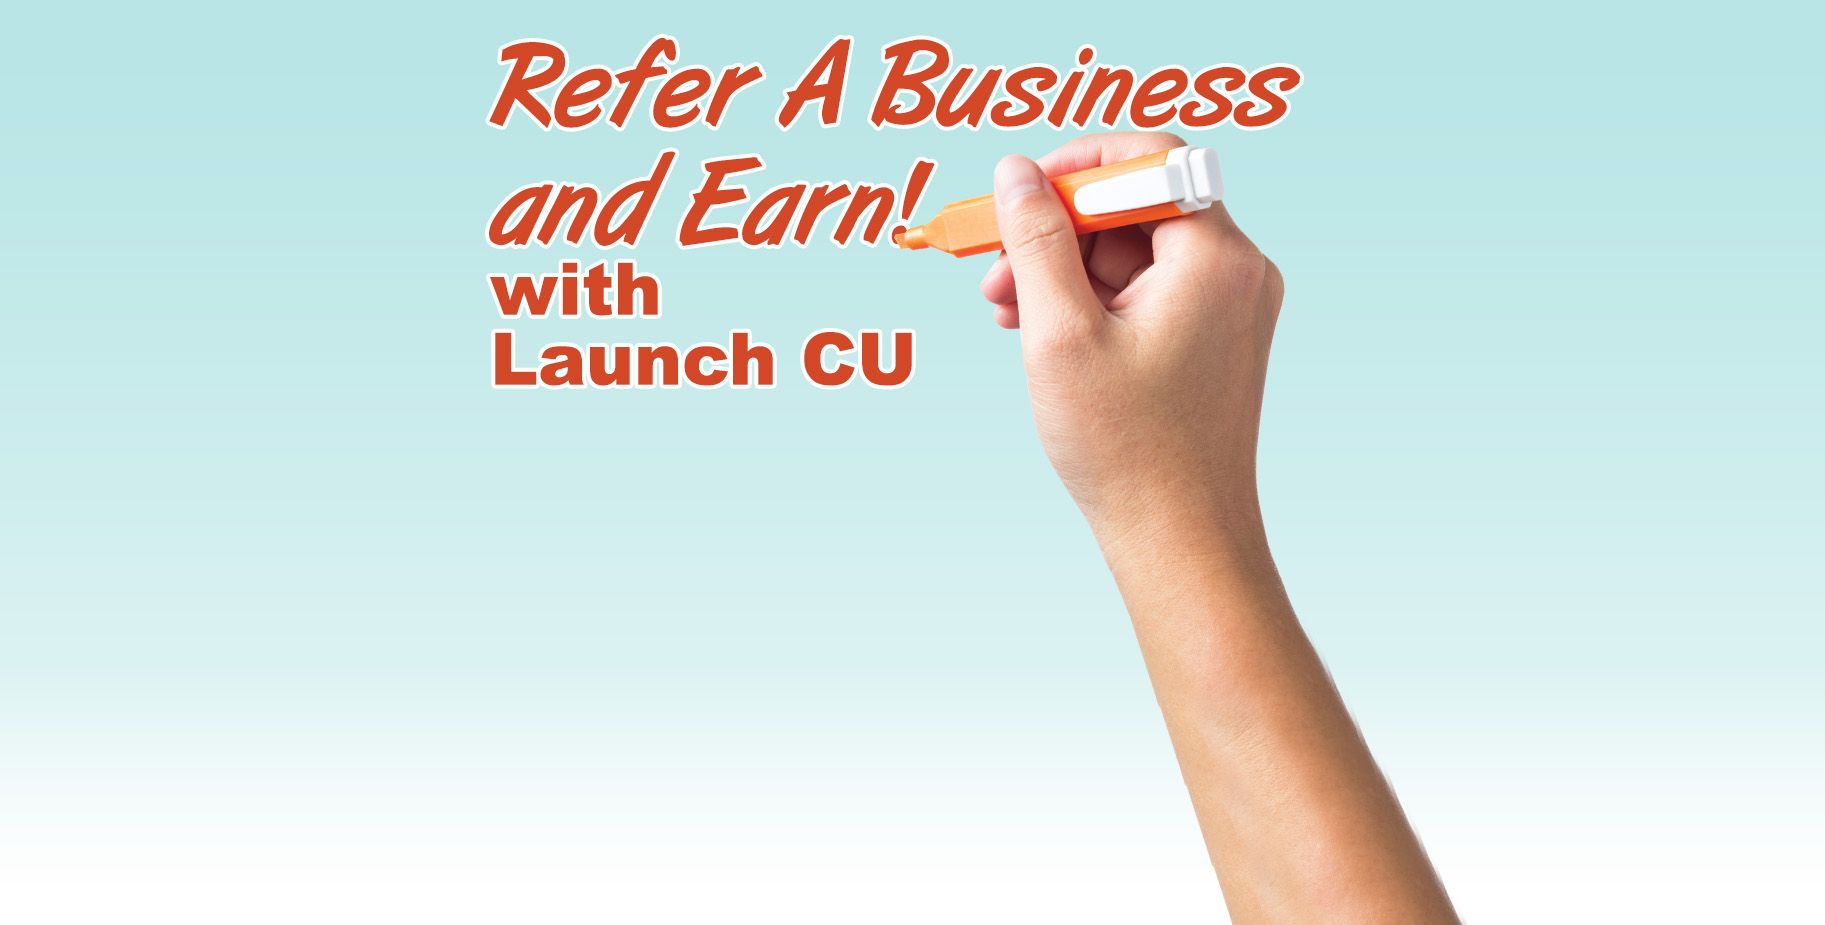 Refer a Business